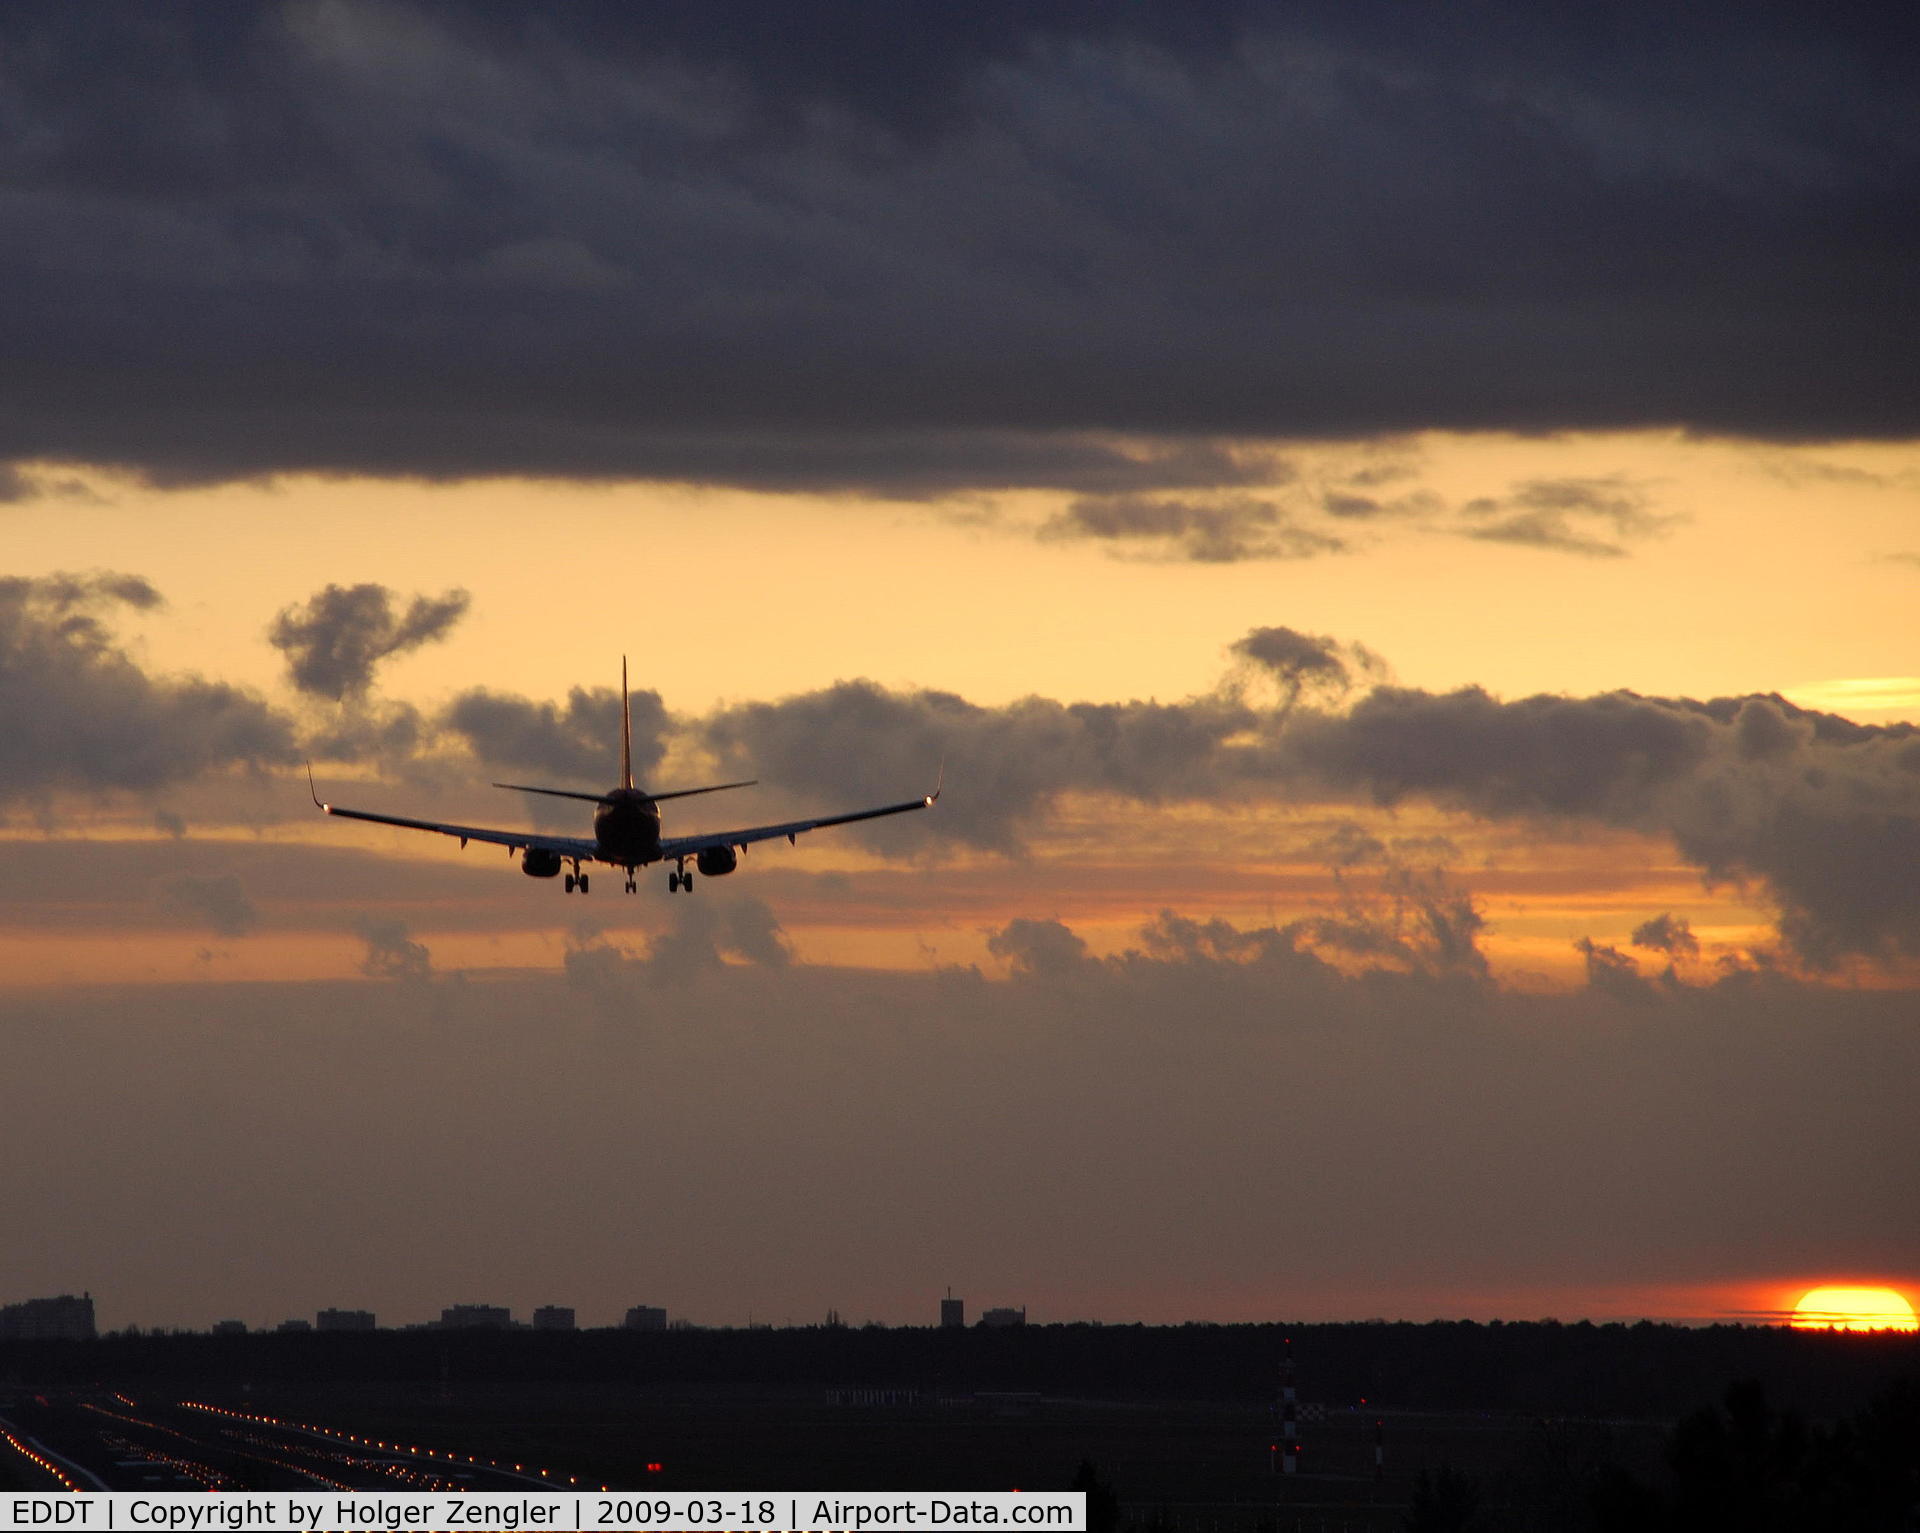 Tegel International Airport (closing in 2011), Berlin Germany (EDDT) - Touch down in late sunlight